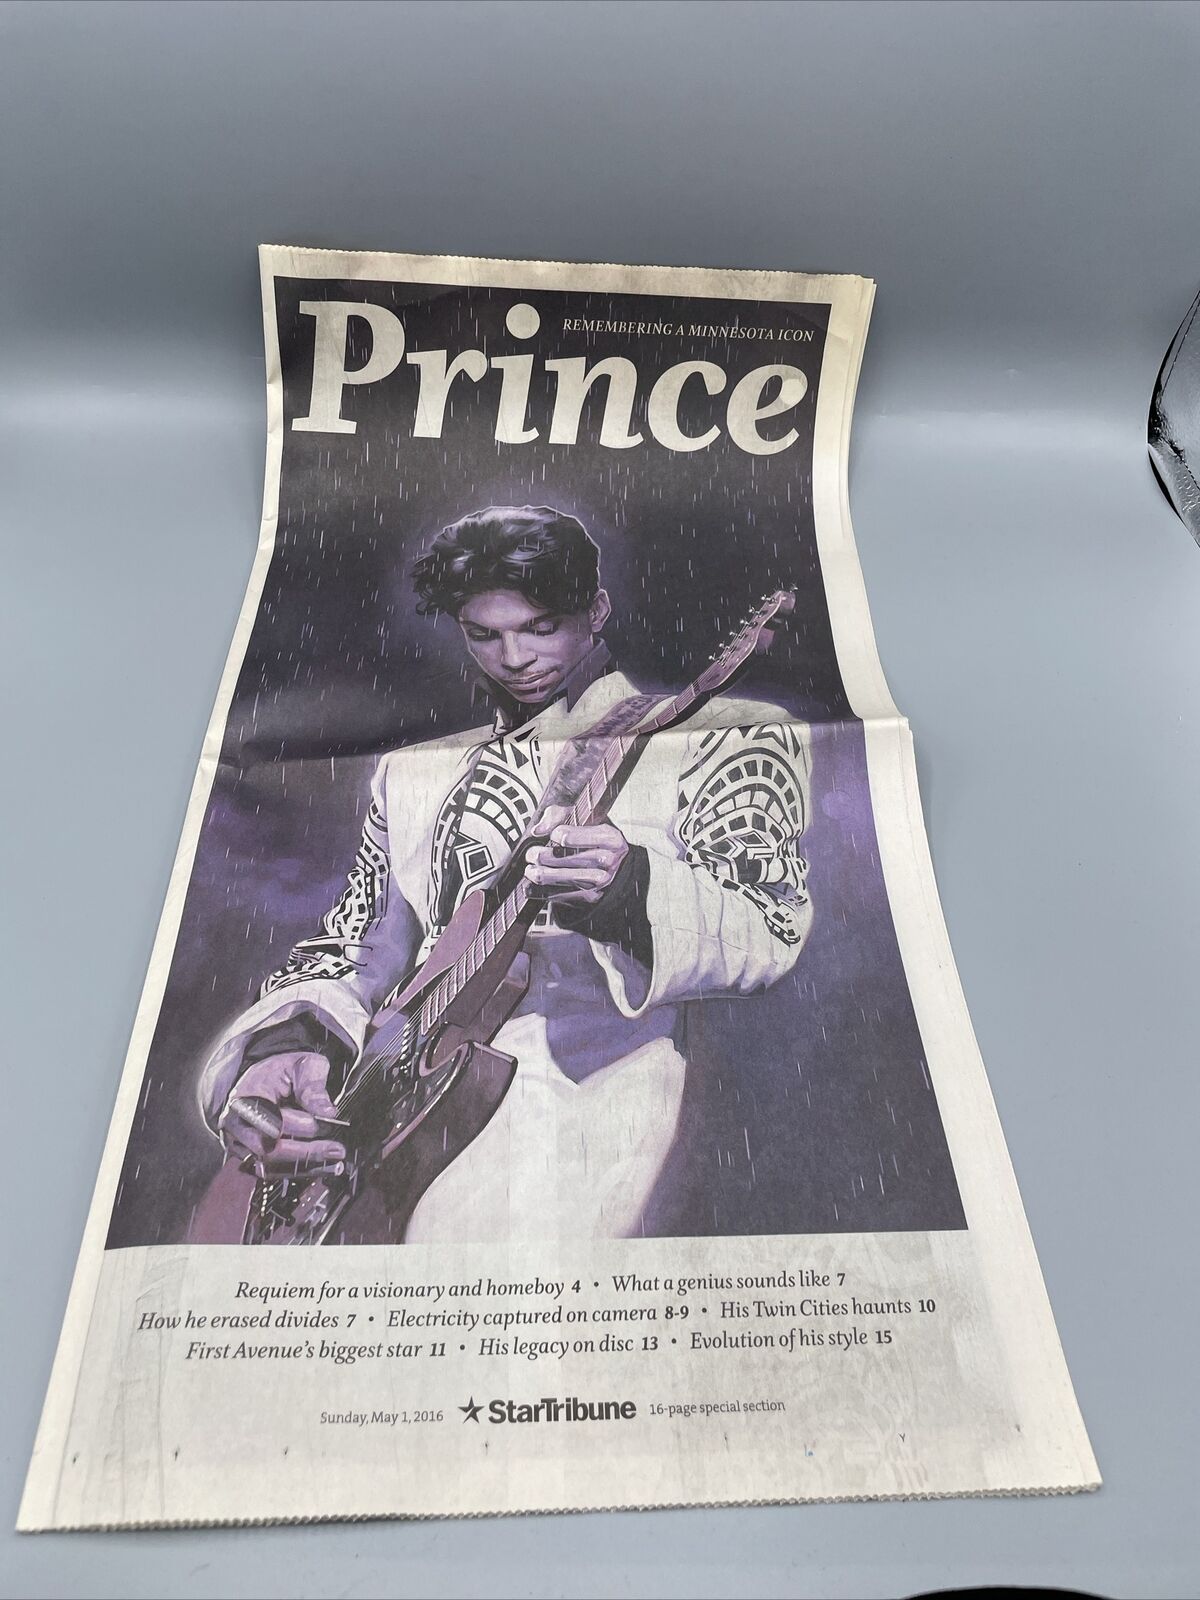 REMEMBERING PRINCE~MAY 1 2016 MPLS STAR TRIBUNE 16 PG TRIBUTE~A MINNESOTA ICON